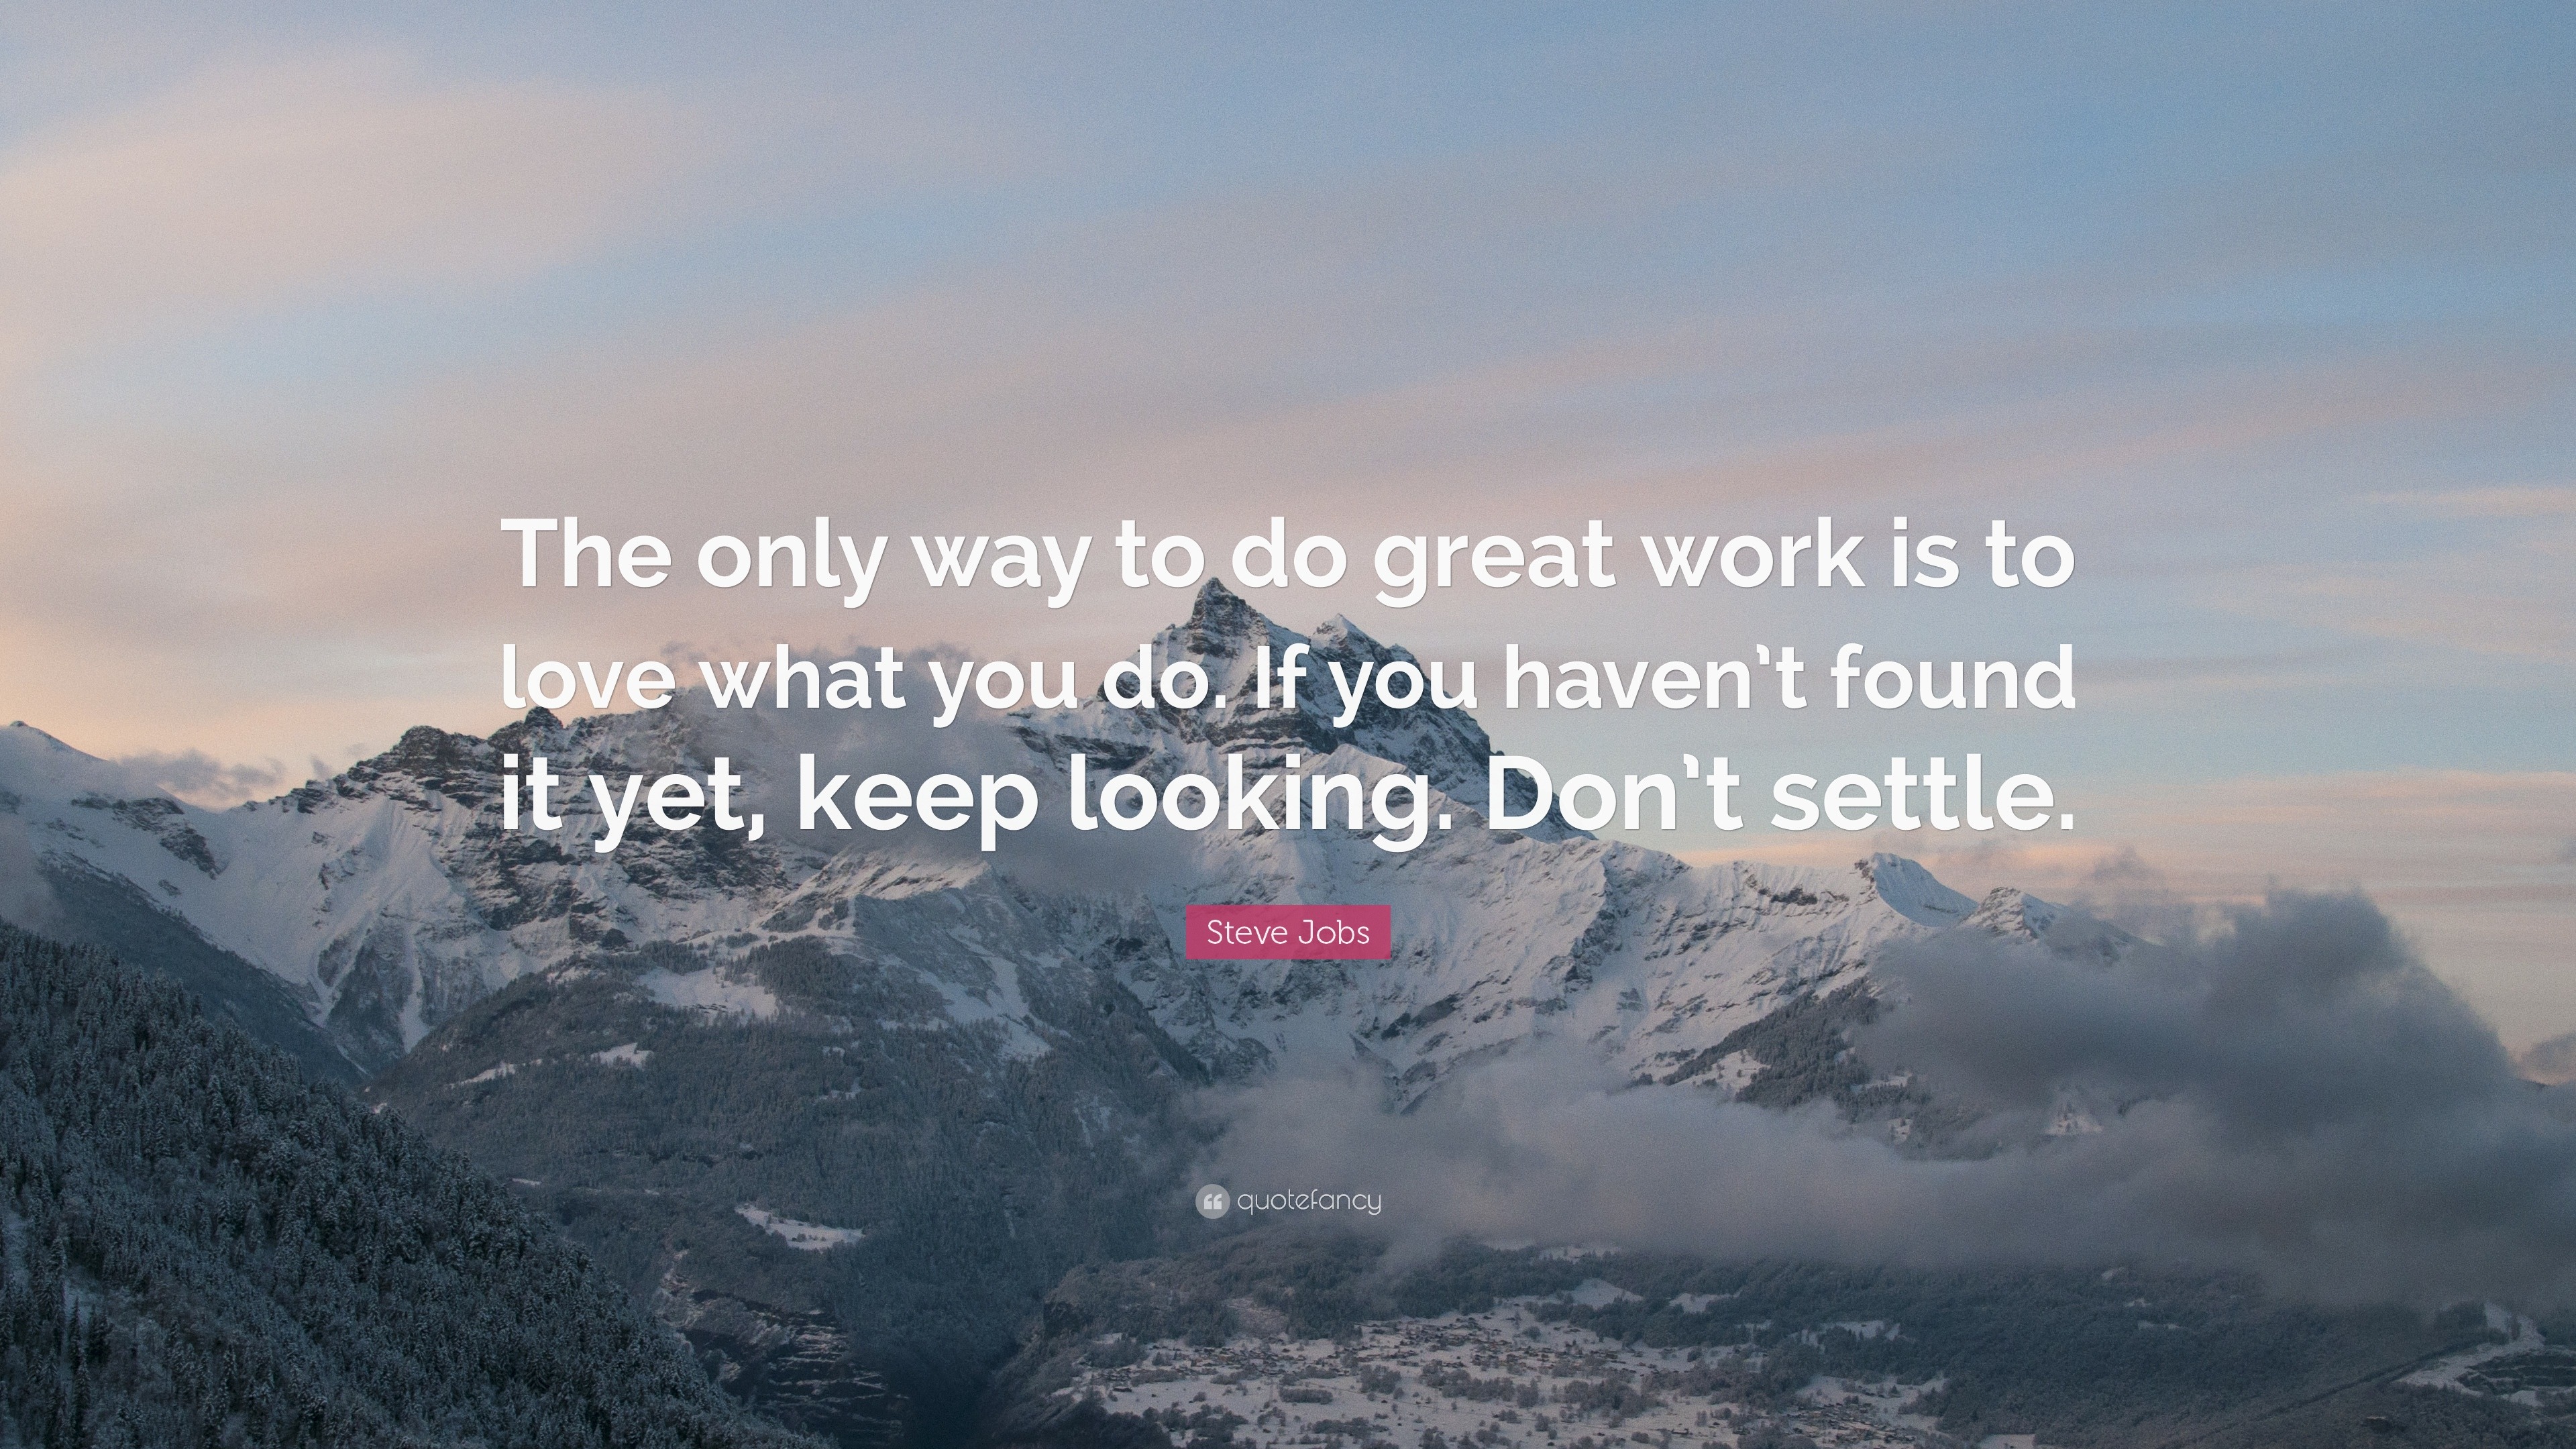 Steve Jobs Quote: "The only way to do great work is to ...